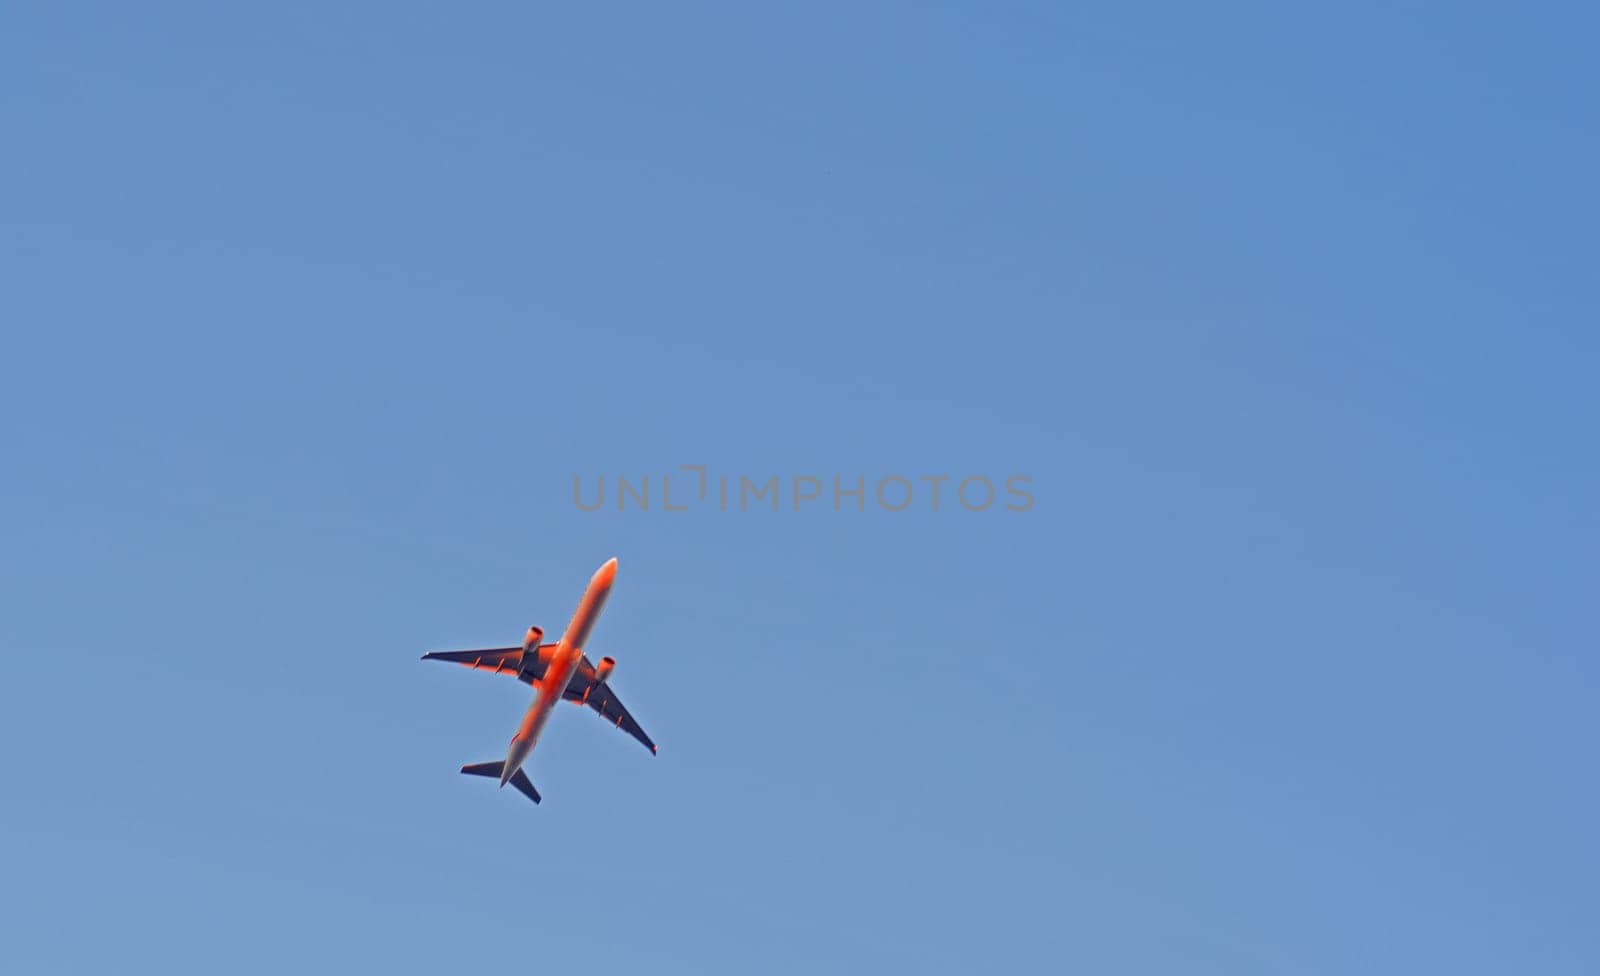 The passenger airplane is flying far away in blue sky